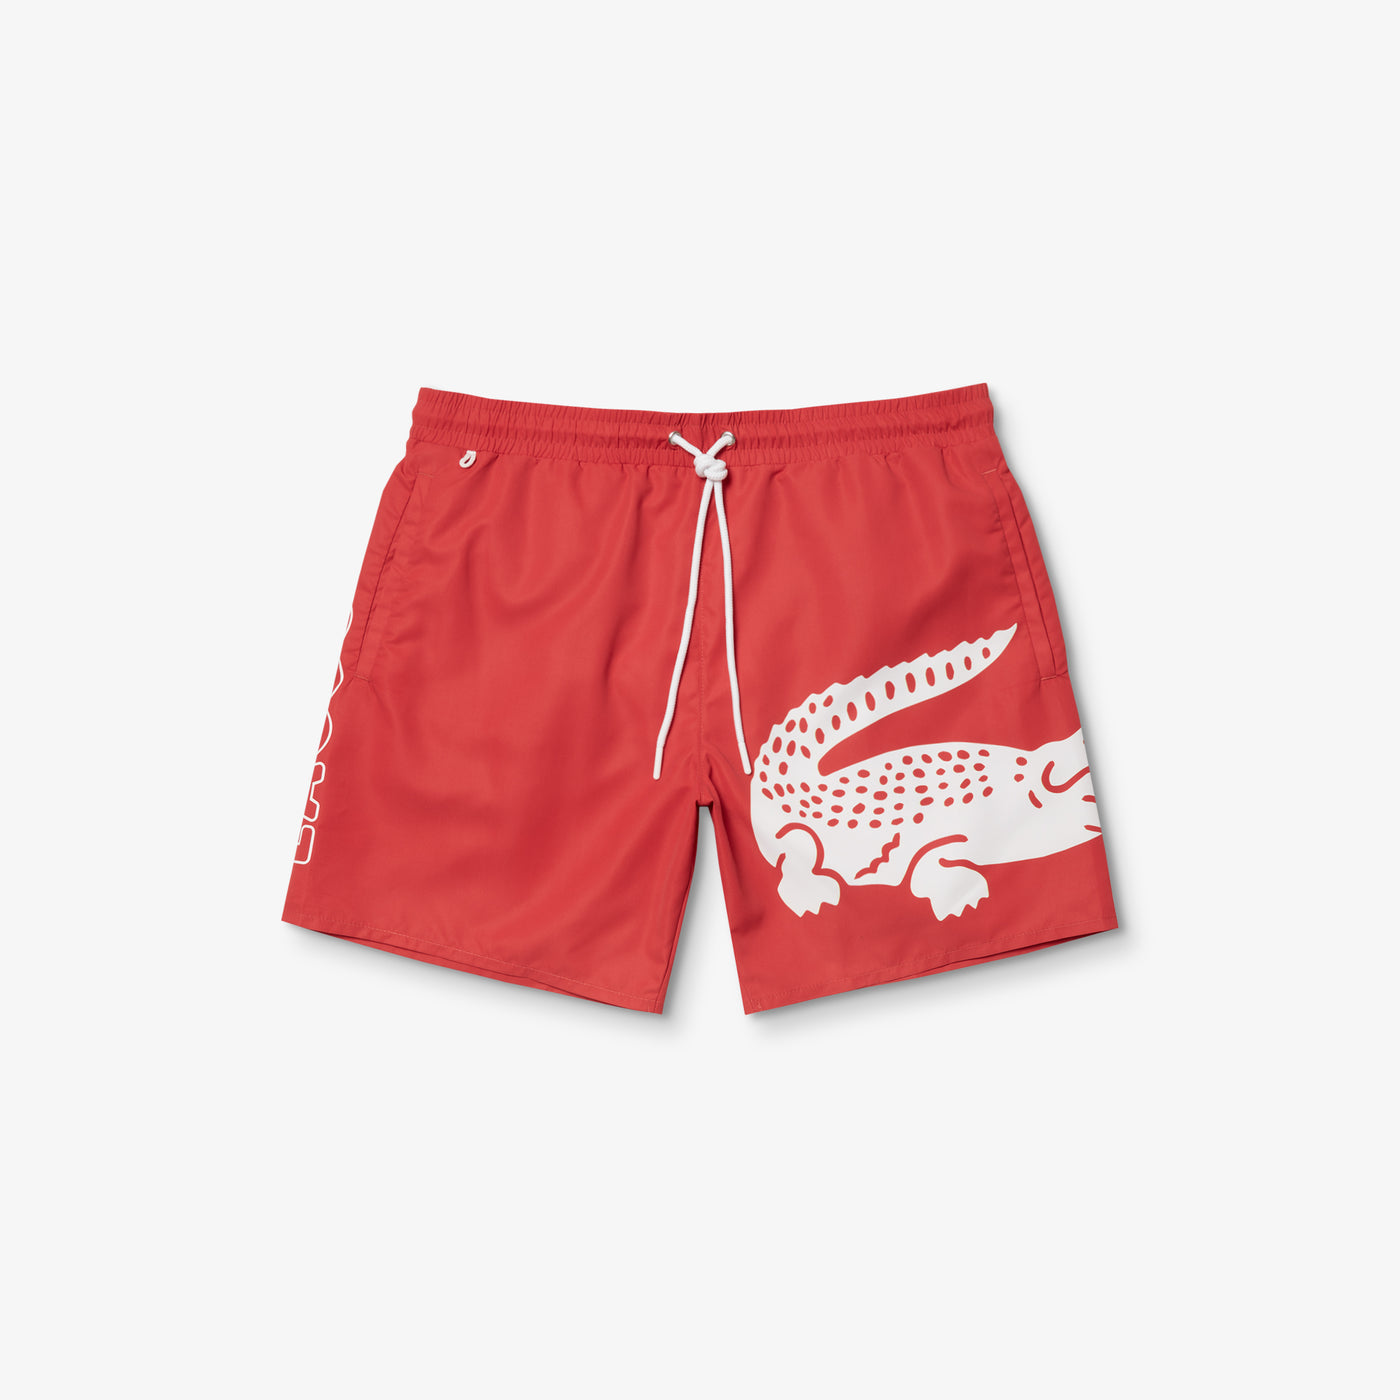 Shop The Latest Collection Of Outlet - Lacoste Men'S Loose Swimming Shorts With Pattern - Mh6281 In Lebanon